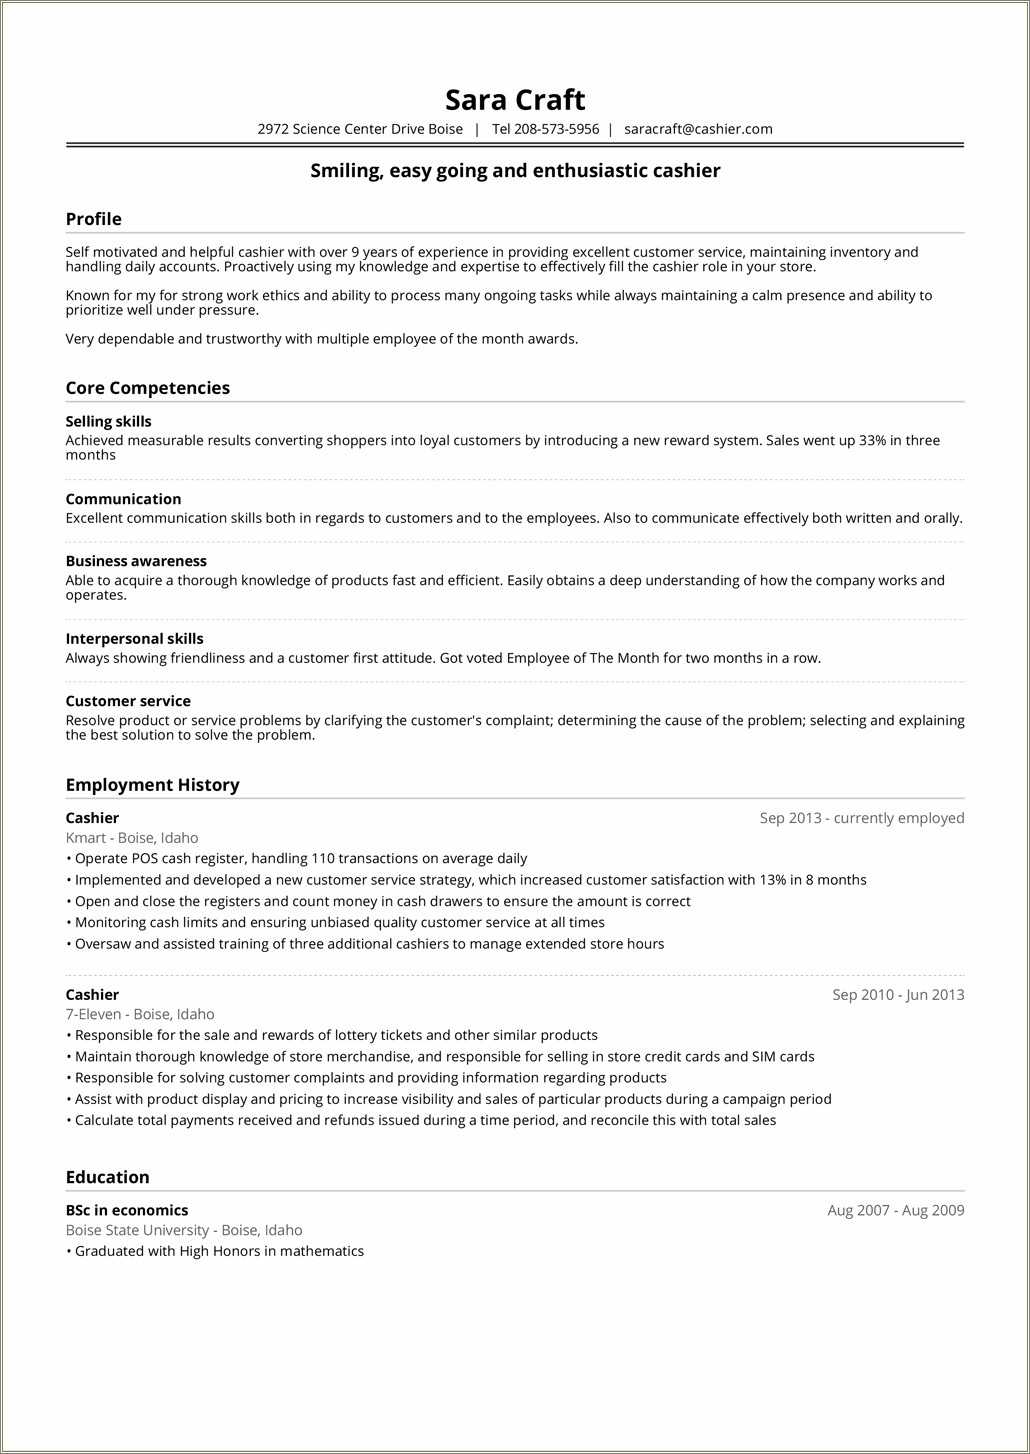 core-functional-resume-template-fre-resume-example-gallery